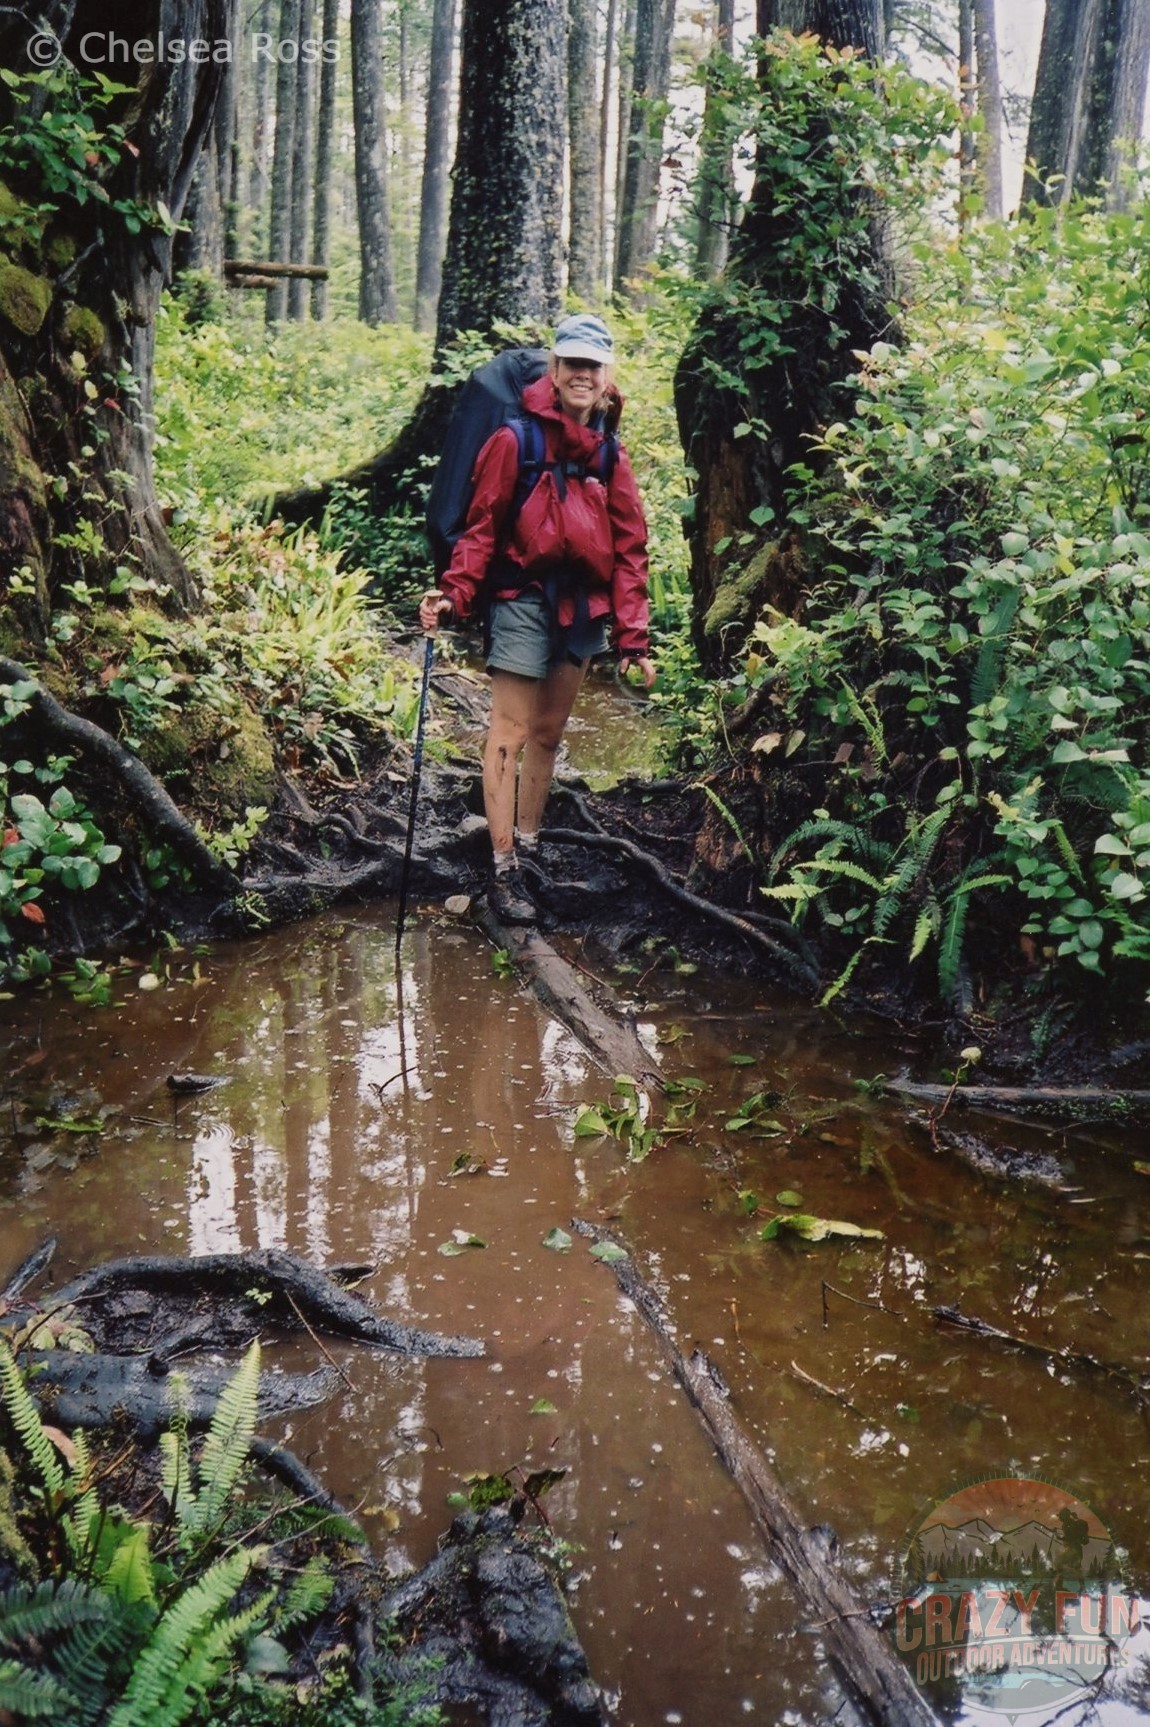 Standing on a slippery log, getting ready to cross a puddle of mud and slippery roots. Be careful with these West Coast Trail trips.